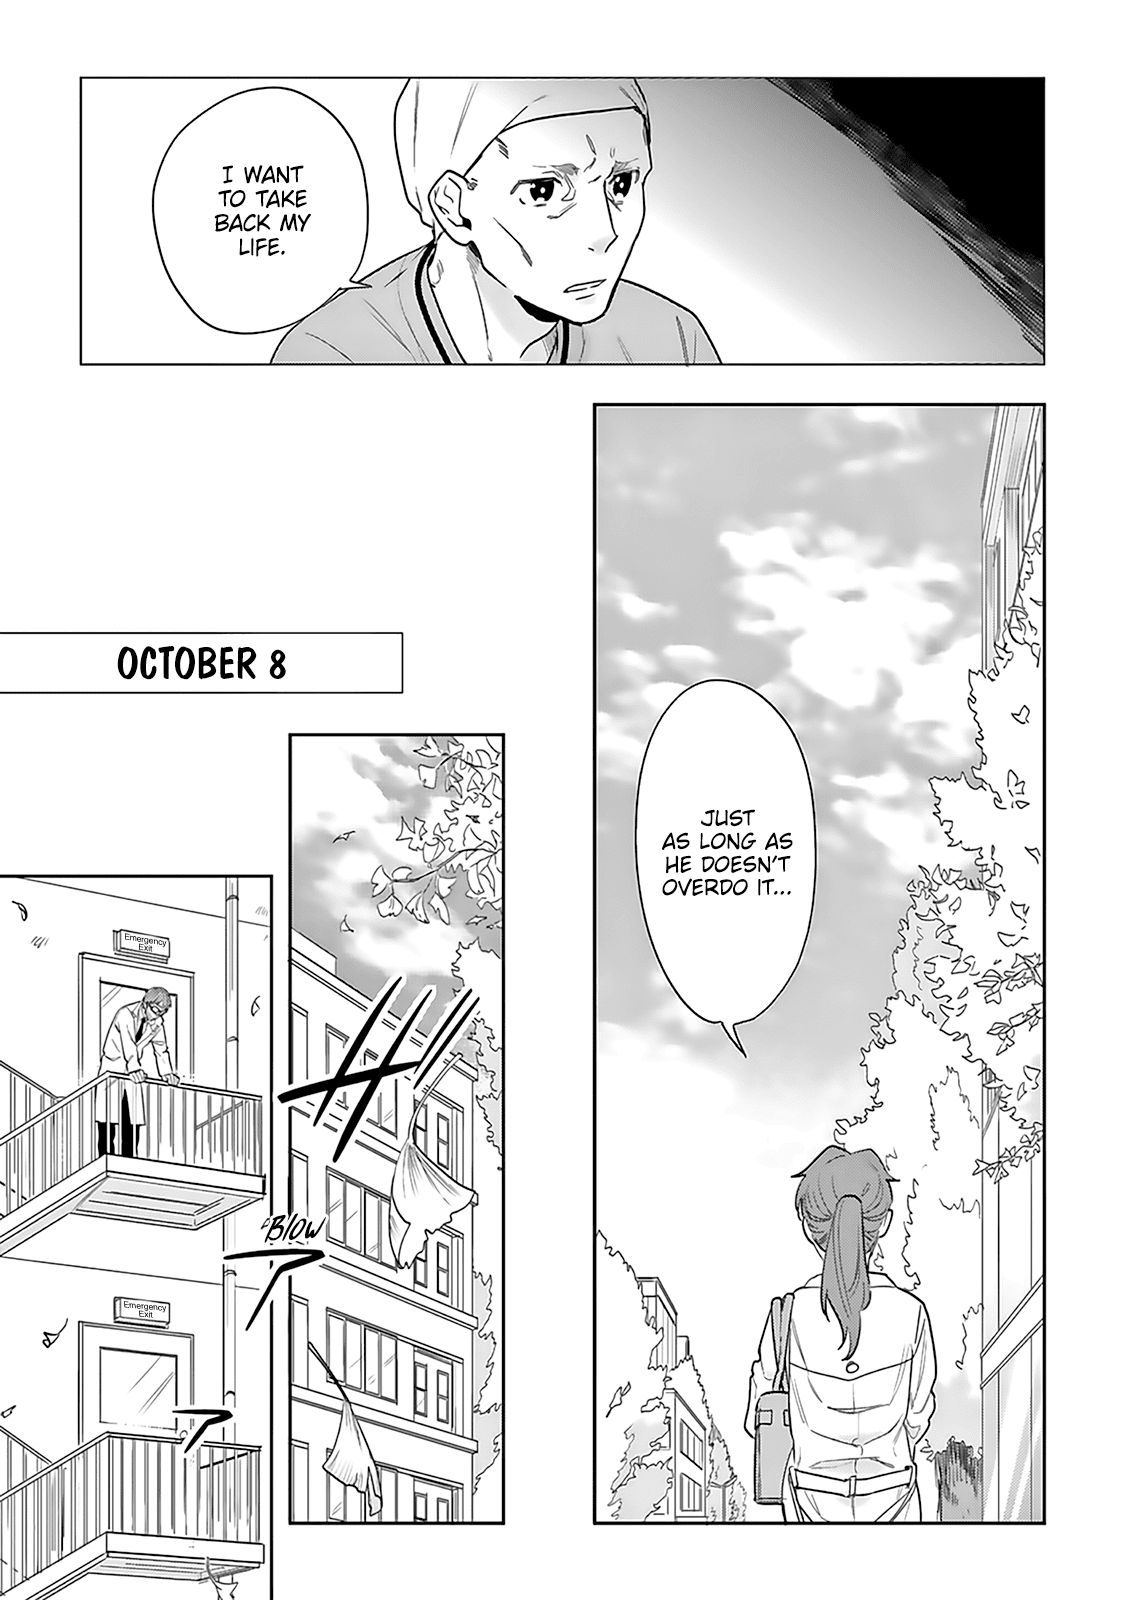 The Last Doctors Think Of You Whenever They Look Up To Cherry Blossoms - Page 4